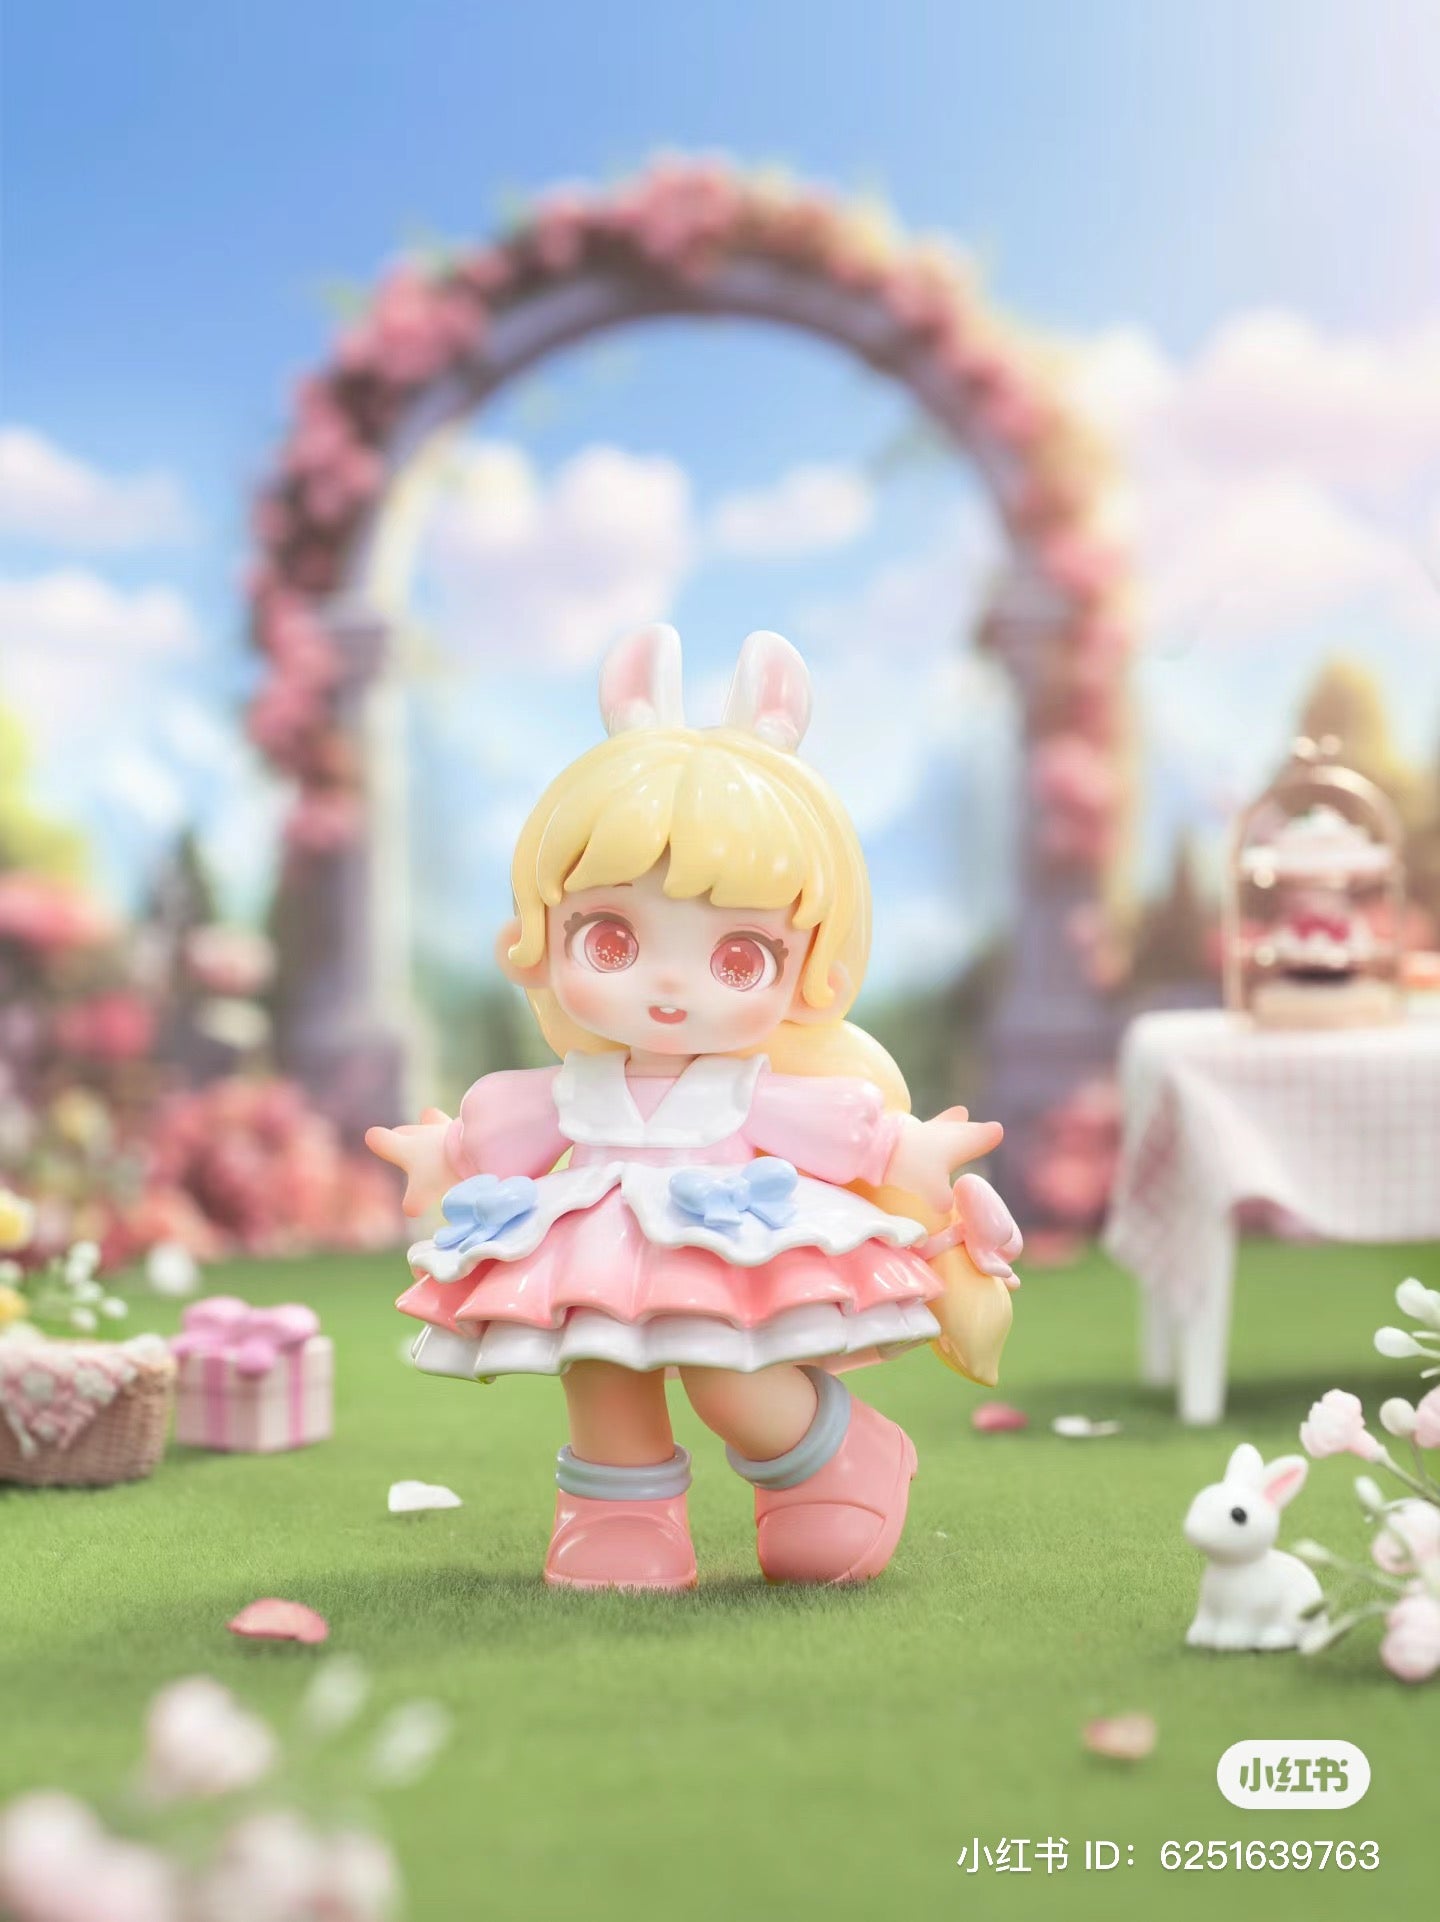 Alt text: Miana - Tea Party In The Forest Blind Box Series toy doll with bunny ears and pink dress, displayed in a garden setting.